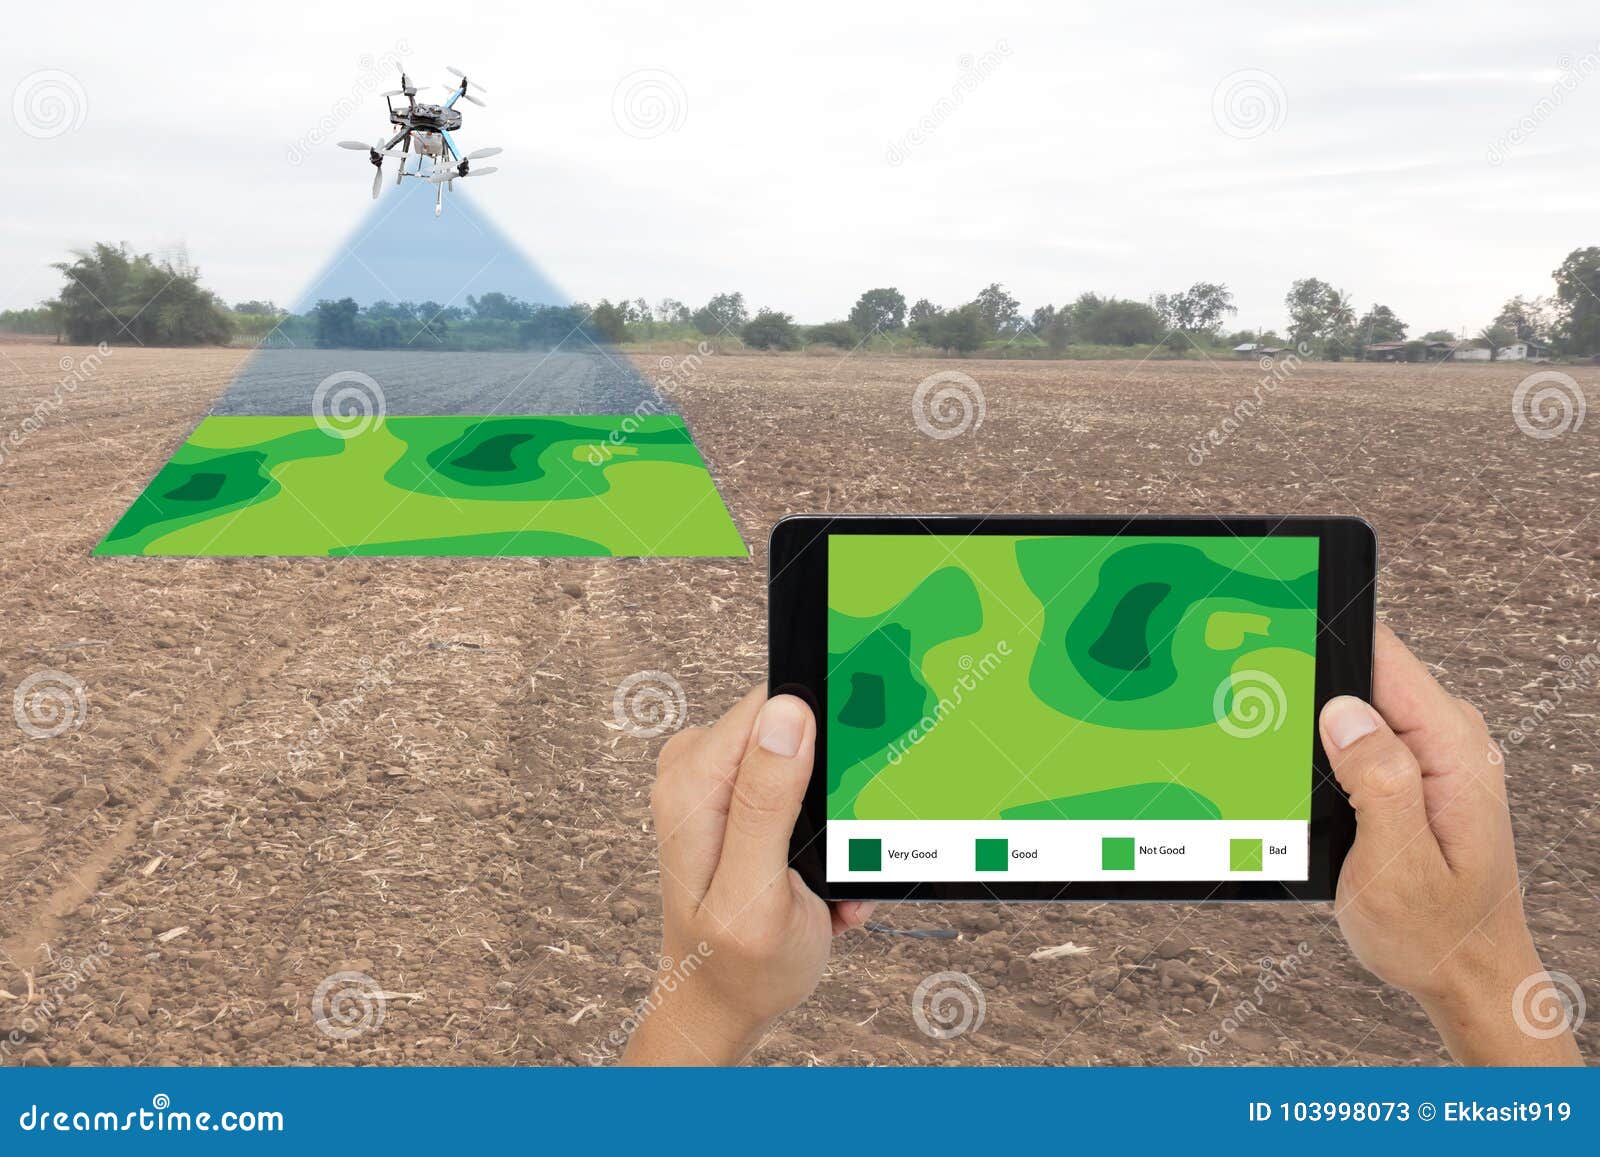 drone for agriculture, drone use for various fields like research analysis, safety,rescue, terrain scanning